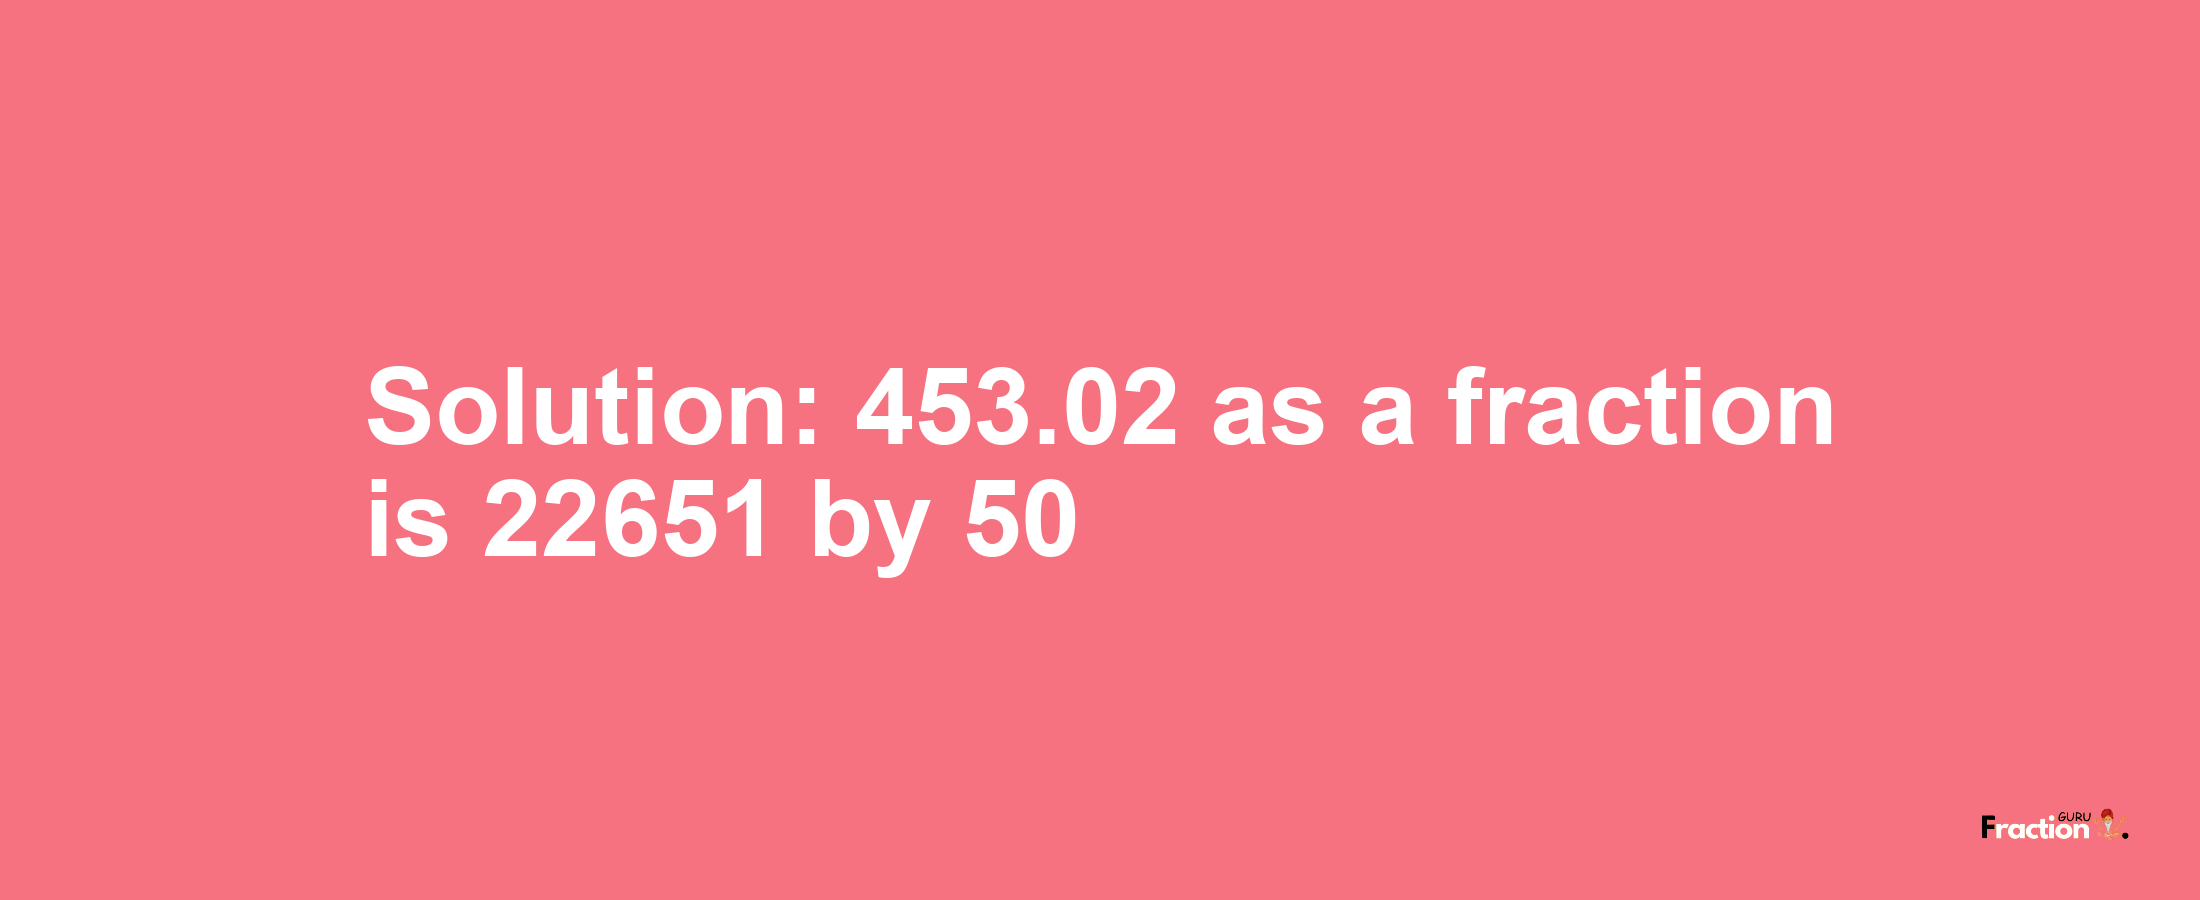 Solution:453.02 as a fraction is 22651/50